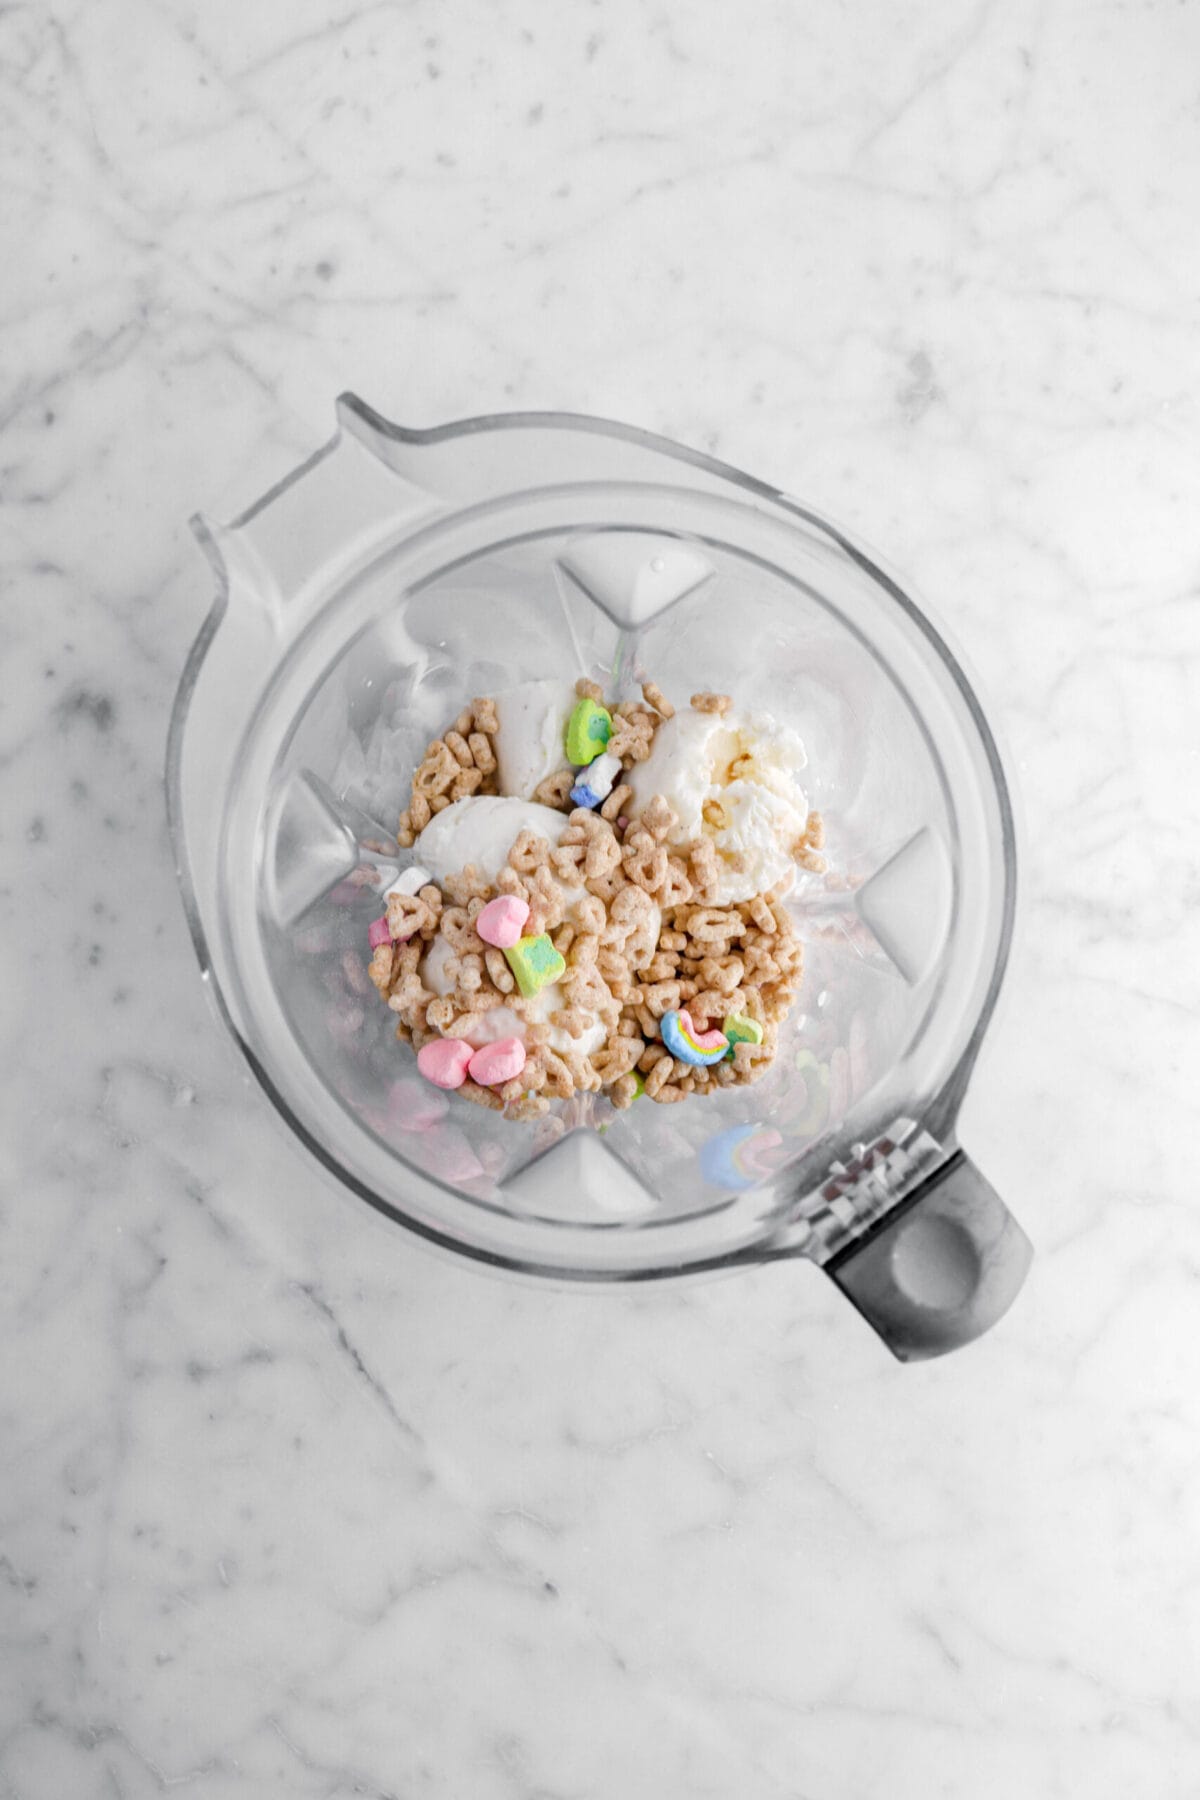 ice cream and lucky charms in blender.